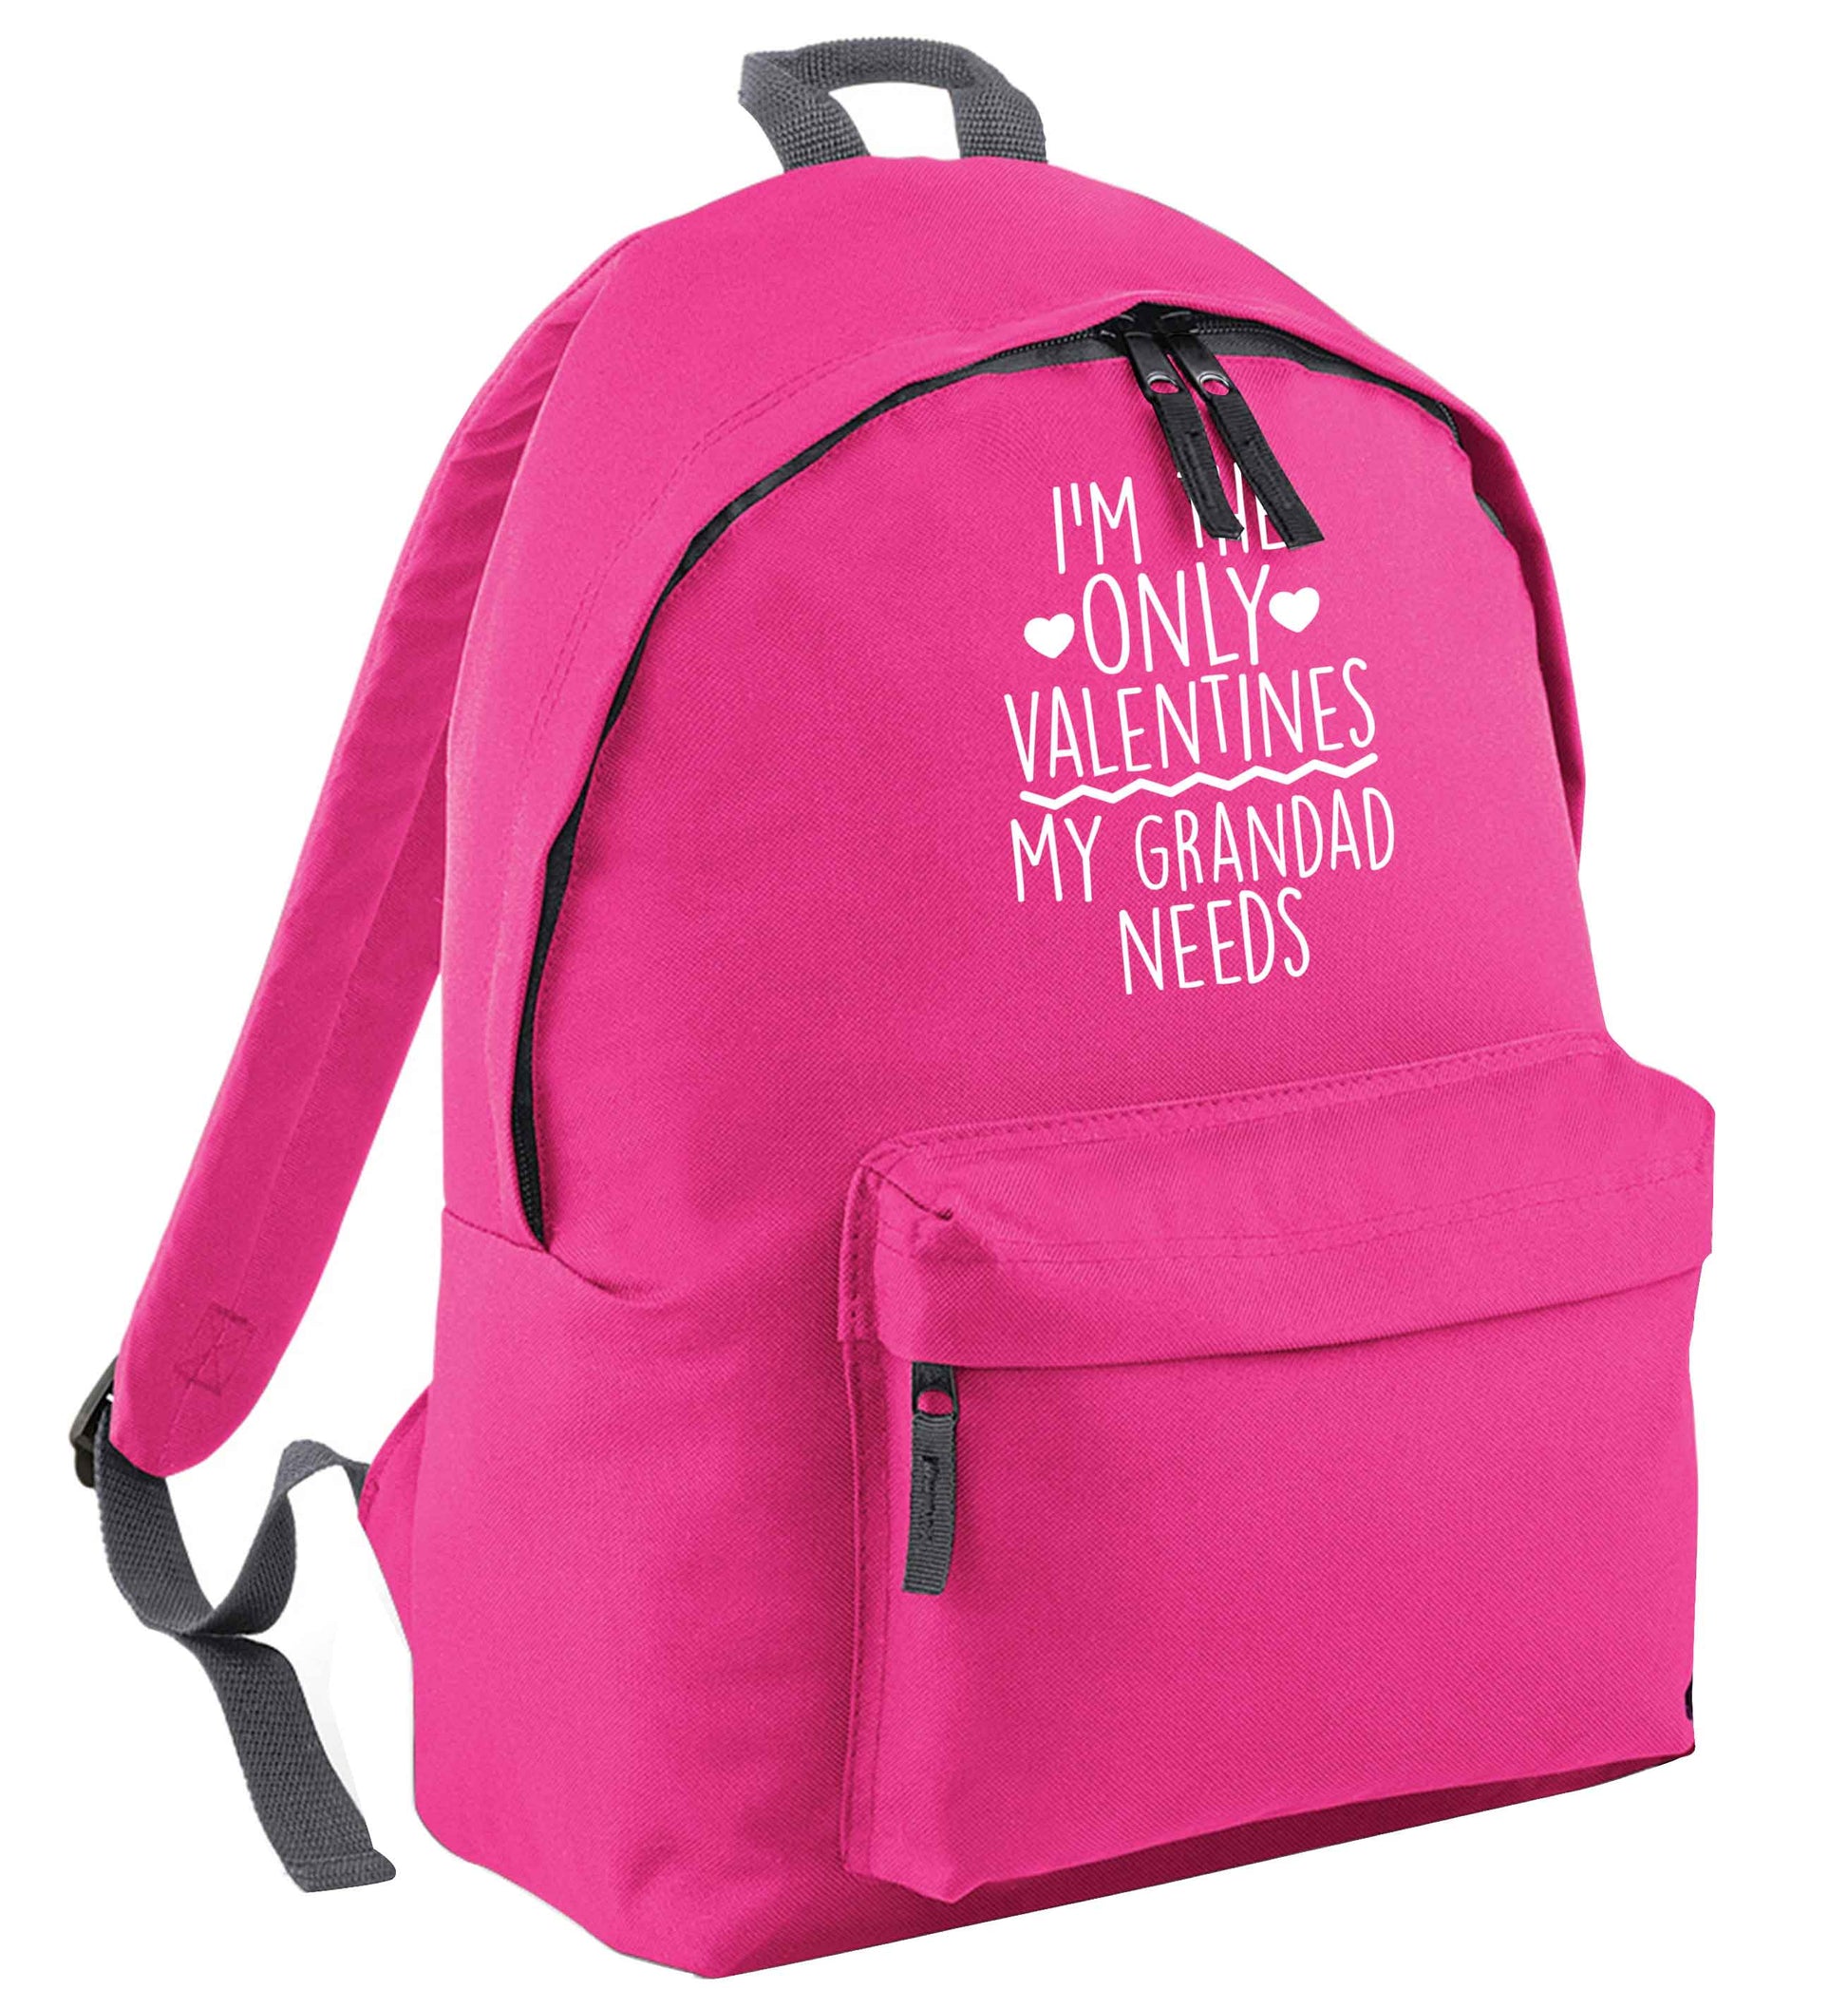 I'm the only valentines my grandad needs pink childrens backpack